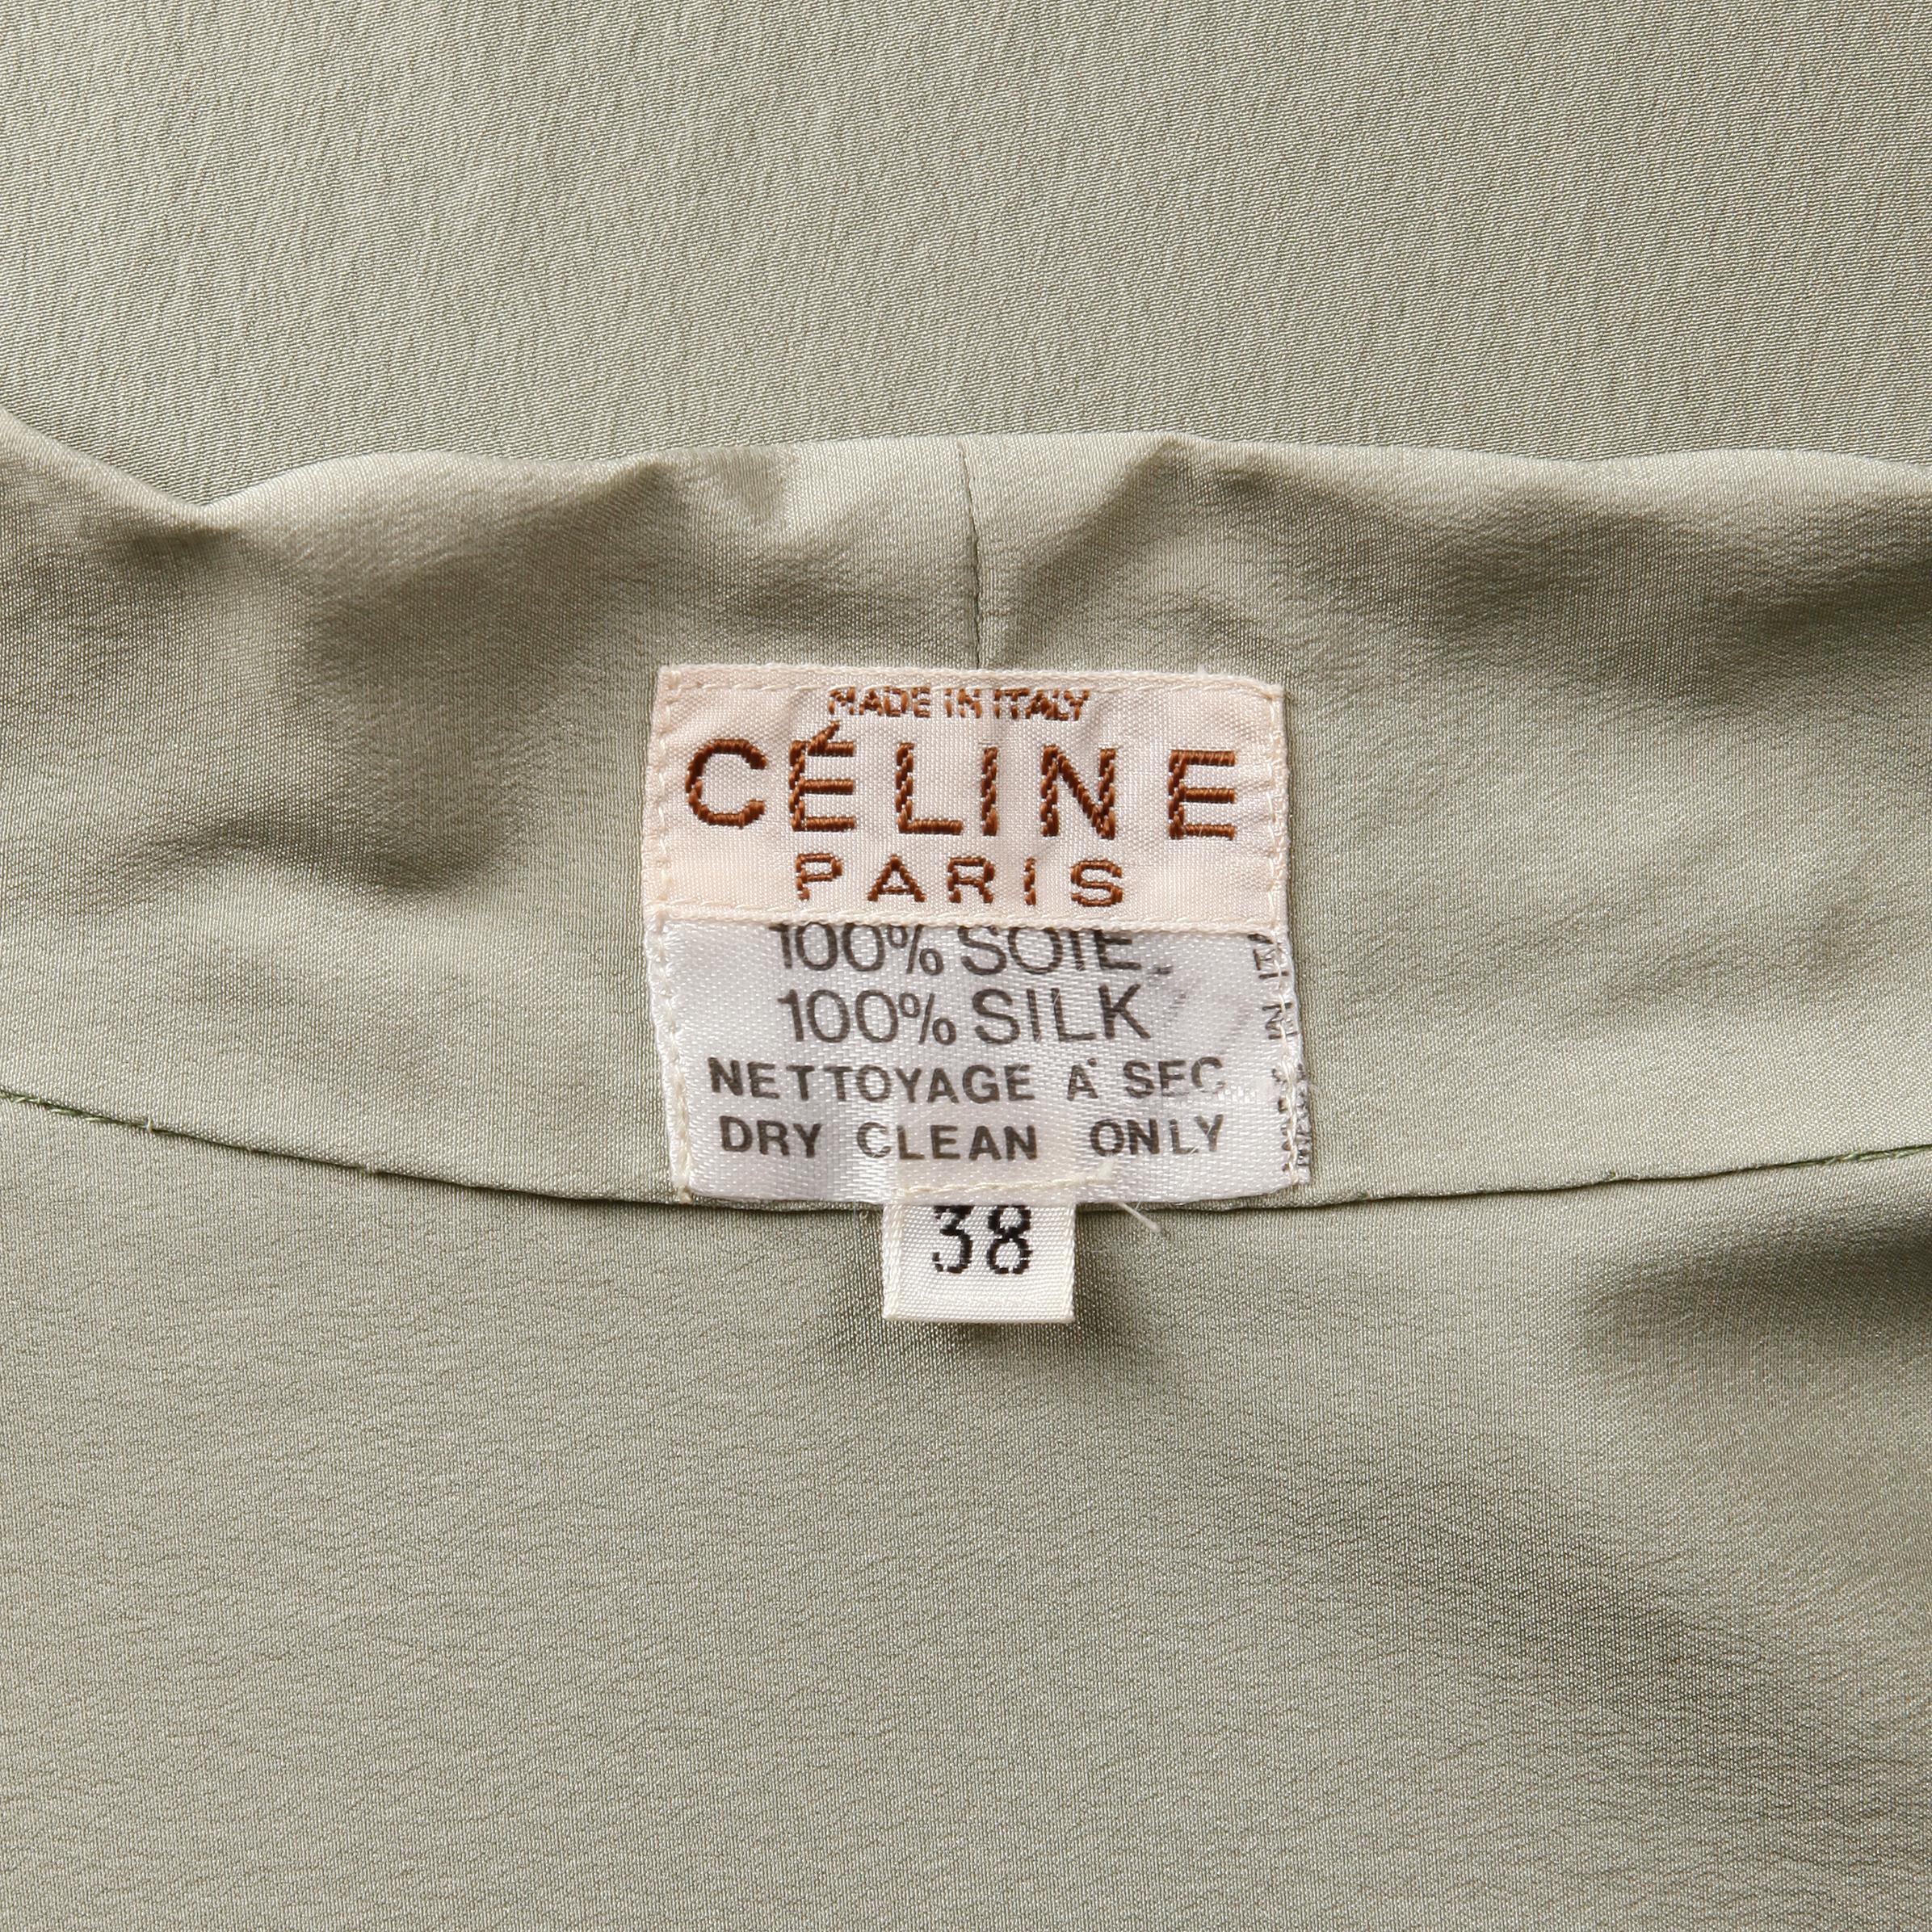 Gorgeous vintage 1970s sage green silk blouse with an ascot tie by Celine Paris. Decorative hand done embroidery featuring the Celine logo on the front of the blouse. Unlined with front button and tie closure. 100% silk. The marked size is 38, and